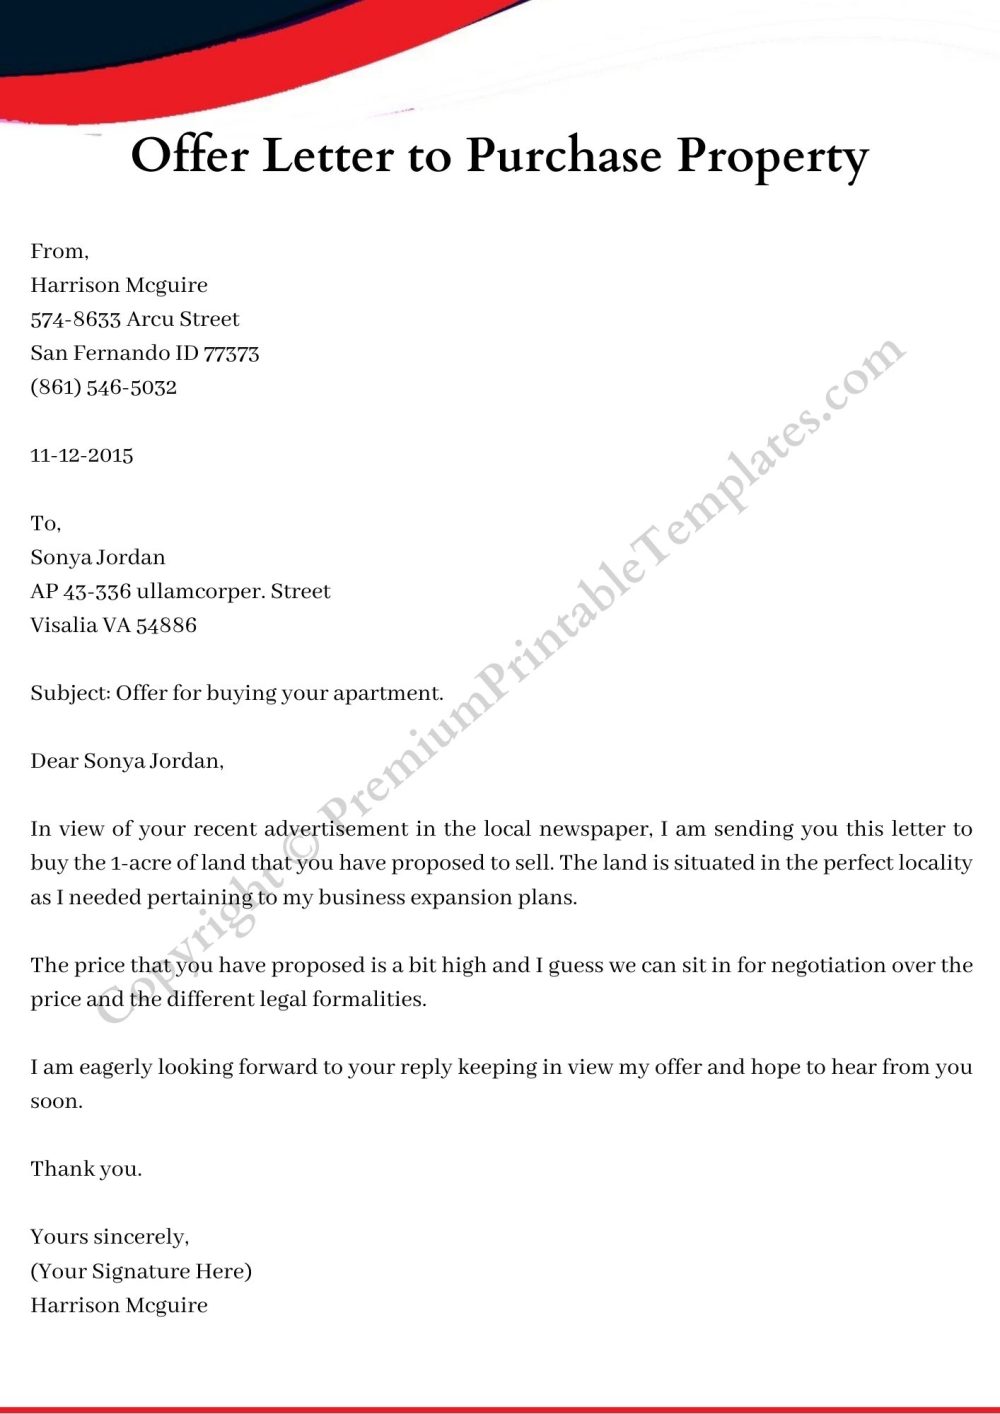 sample offer letter to purchase property